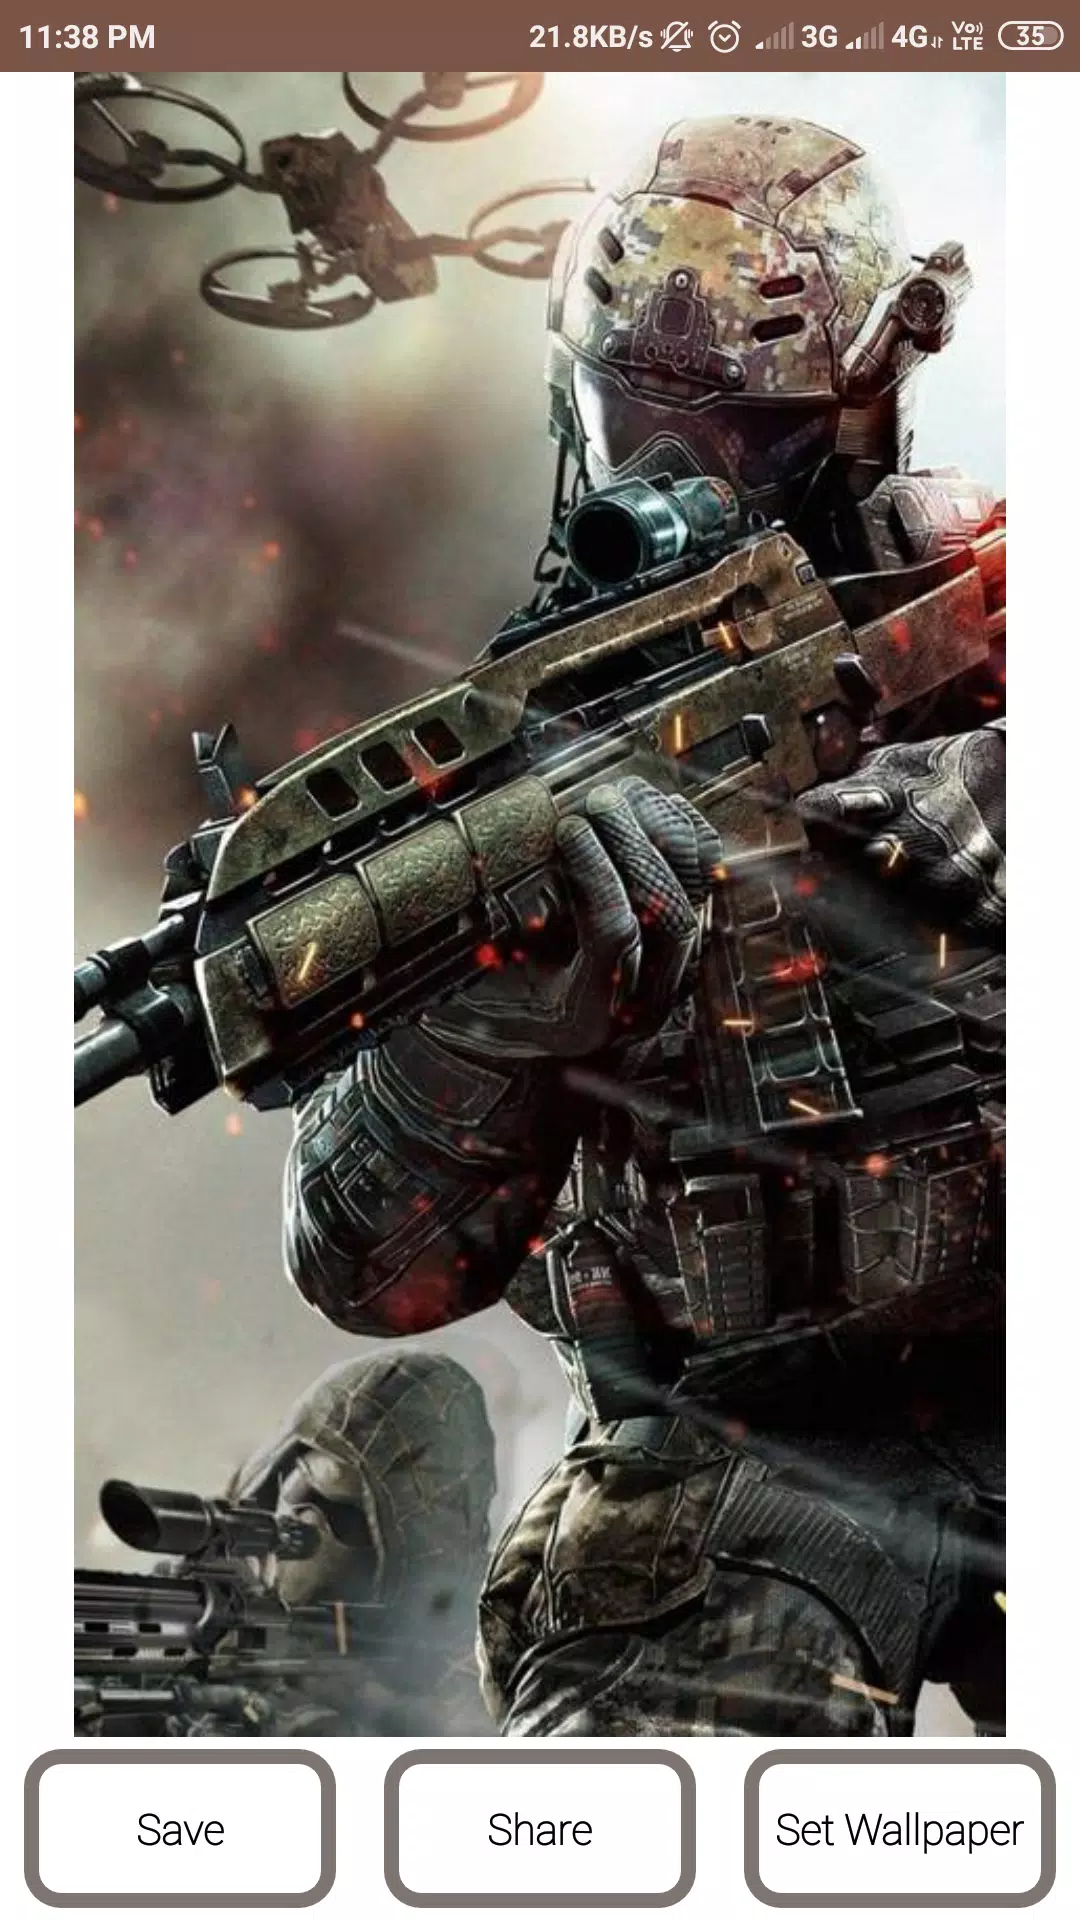 COD Mobile Wallpapers HD 2019 APK for Android Download